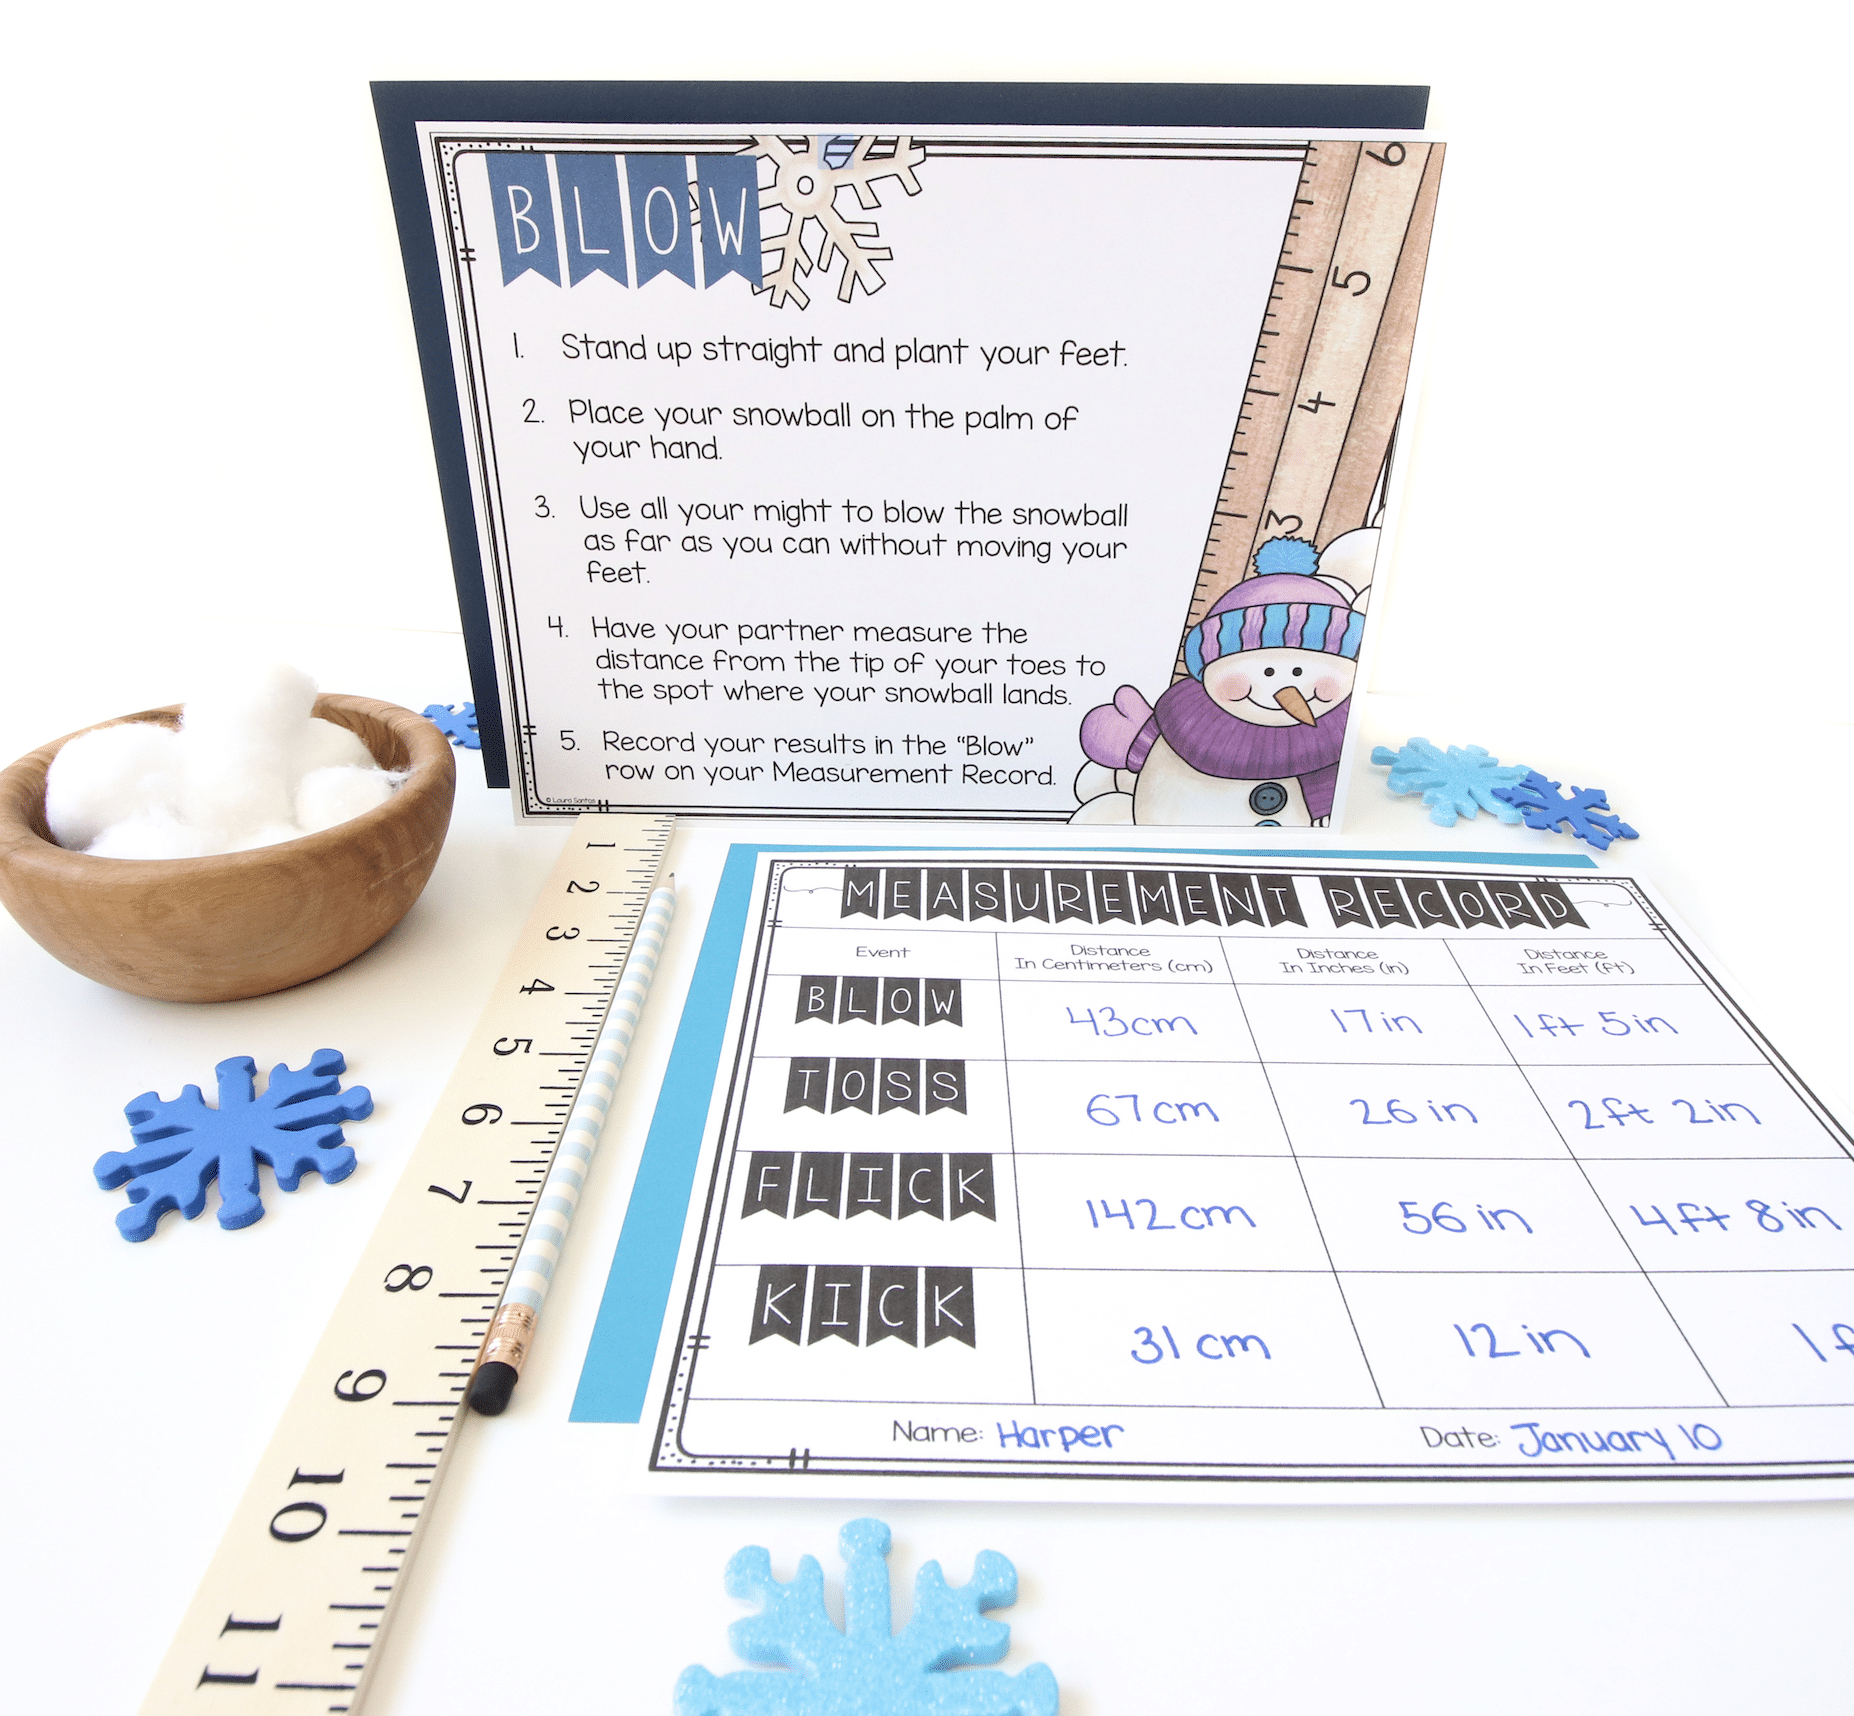 Core Inspiration 2nd grade winter measure-then math project with student measurement record, ruler, and project instruction card